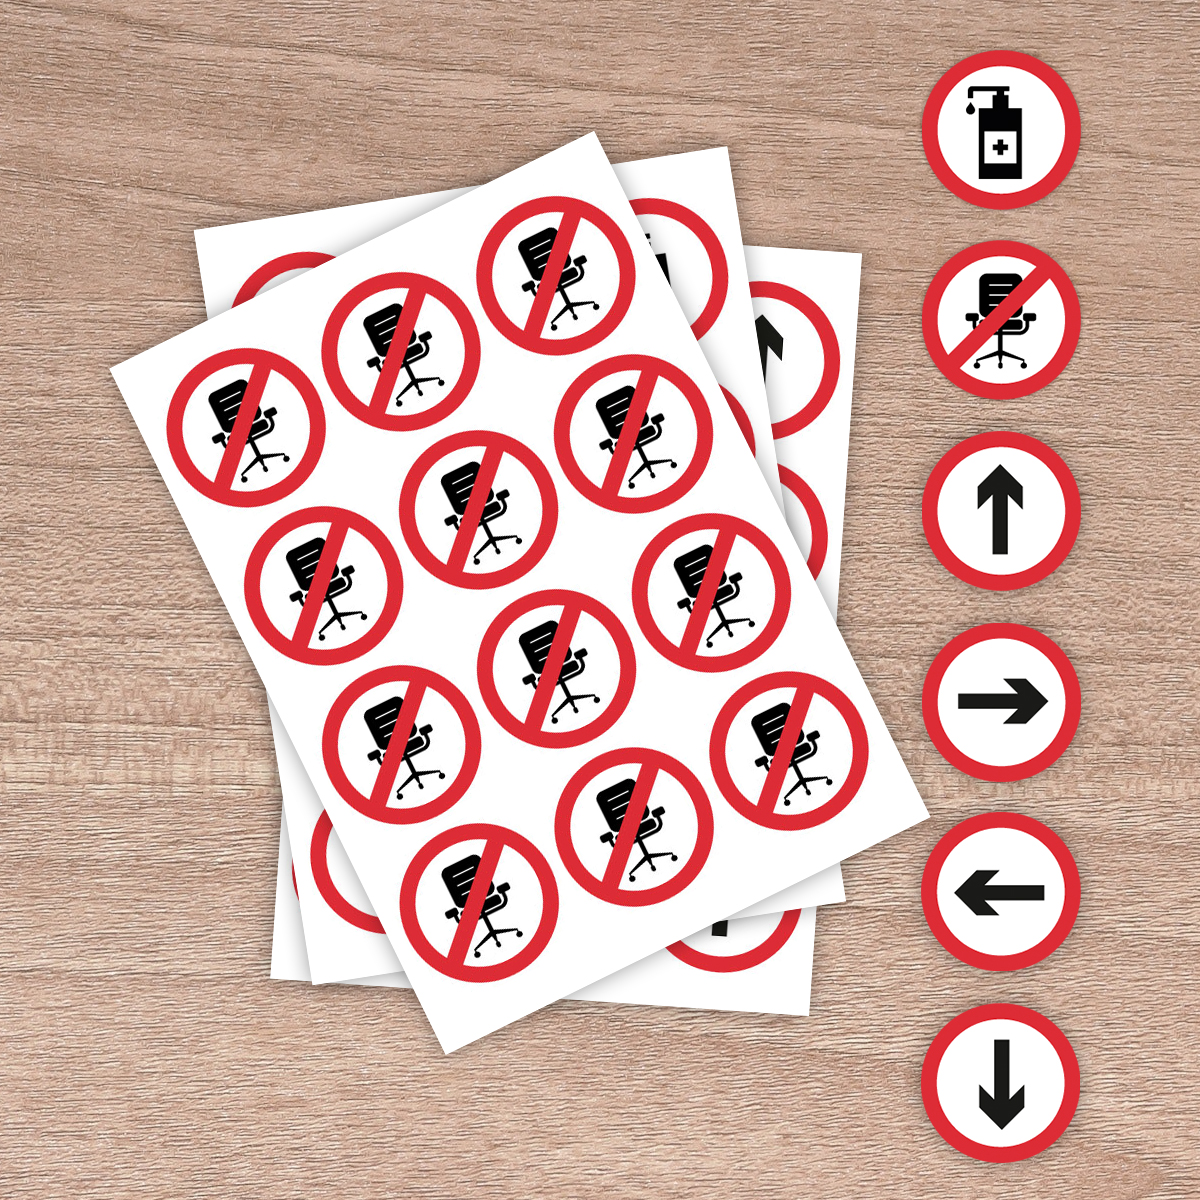 Do Not Sit at this Desk / On this Chair - 64mm Round Stickers